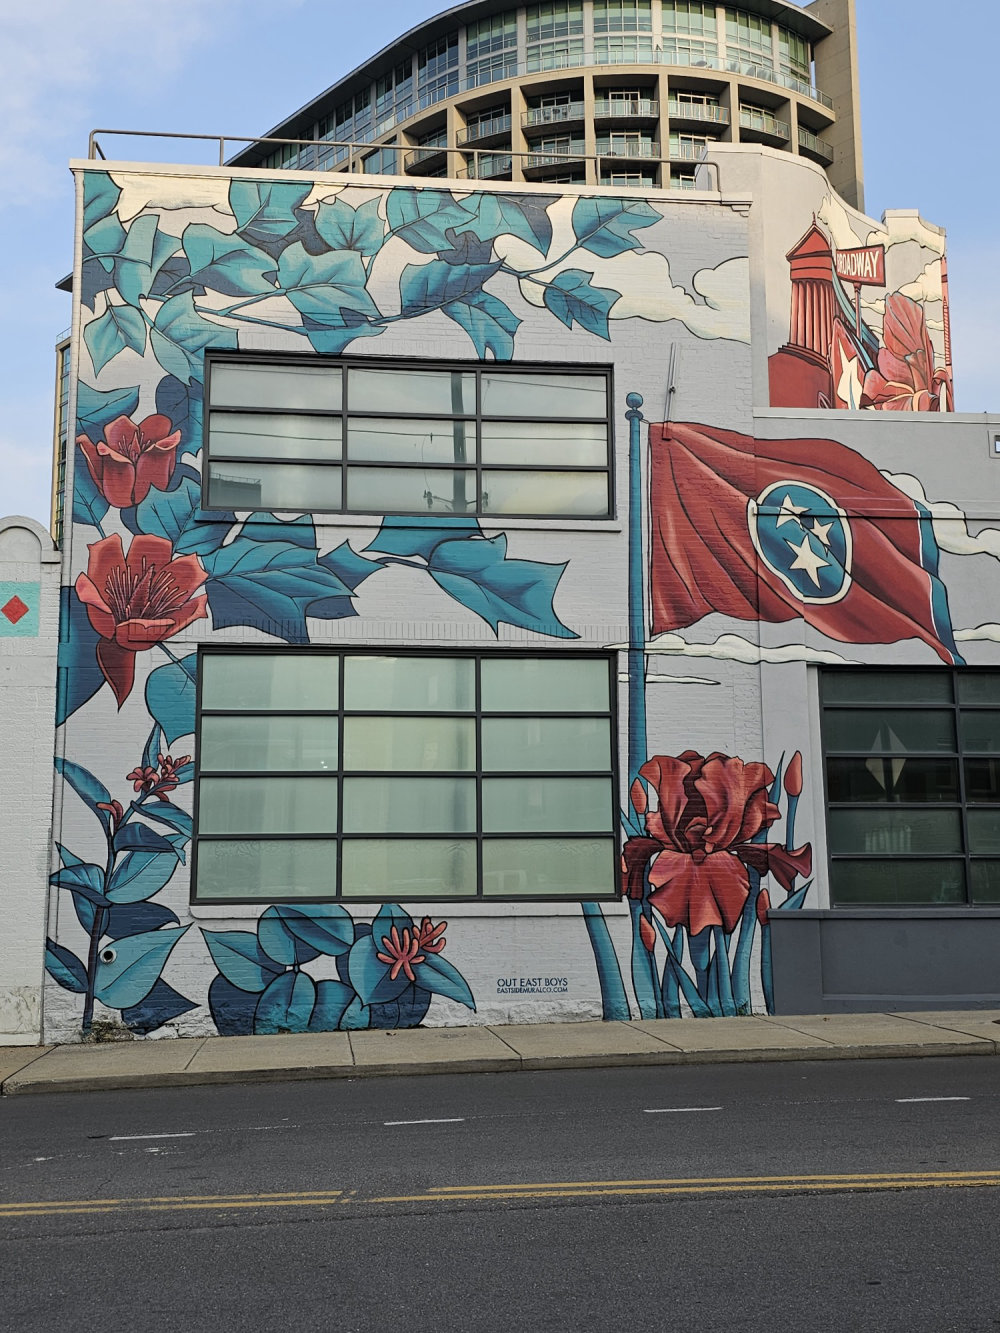 mural in Nashville by artist Out East Boys.